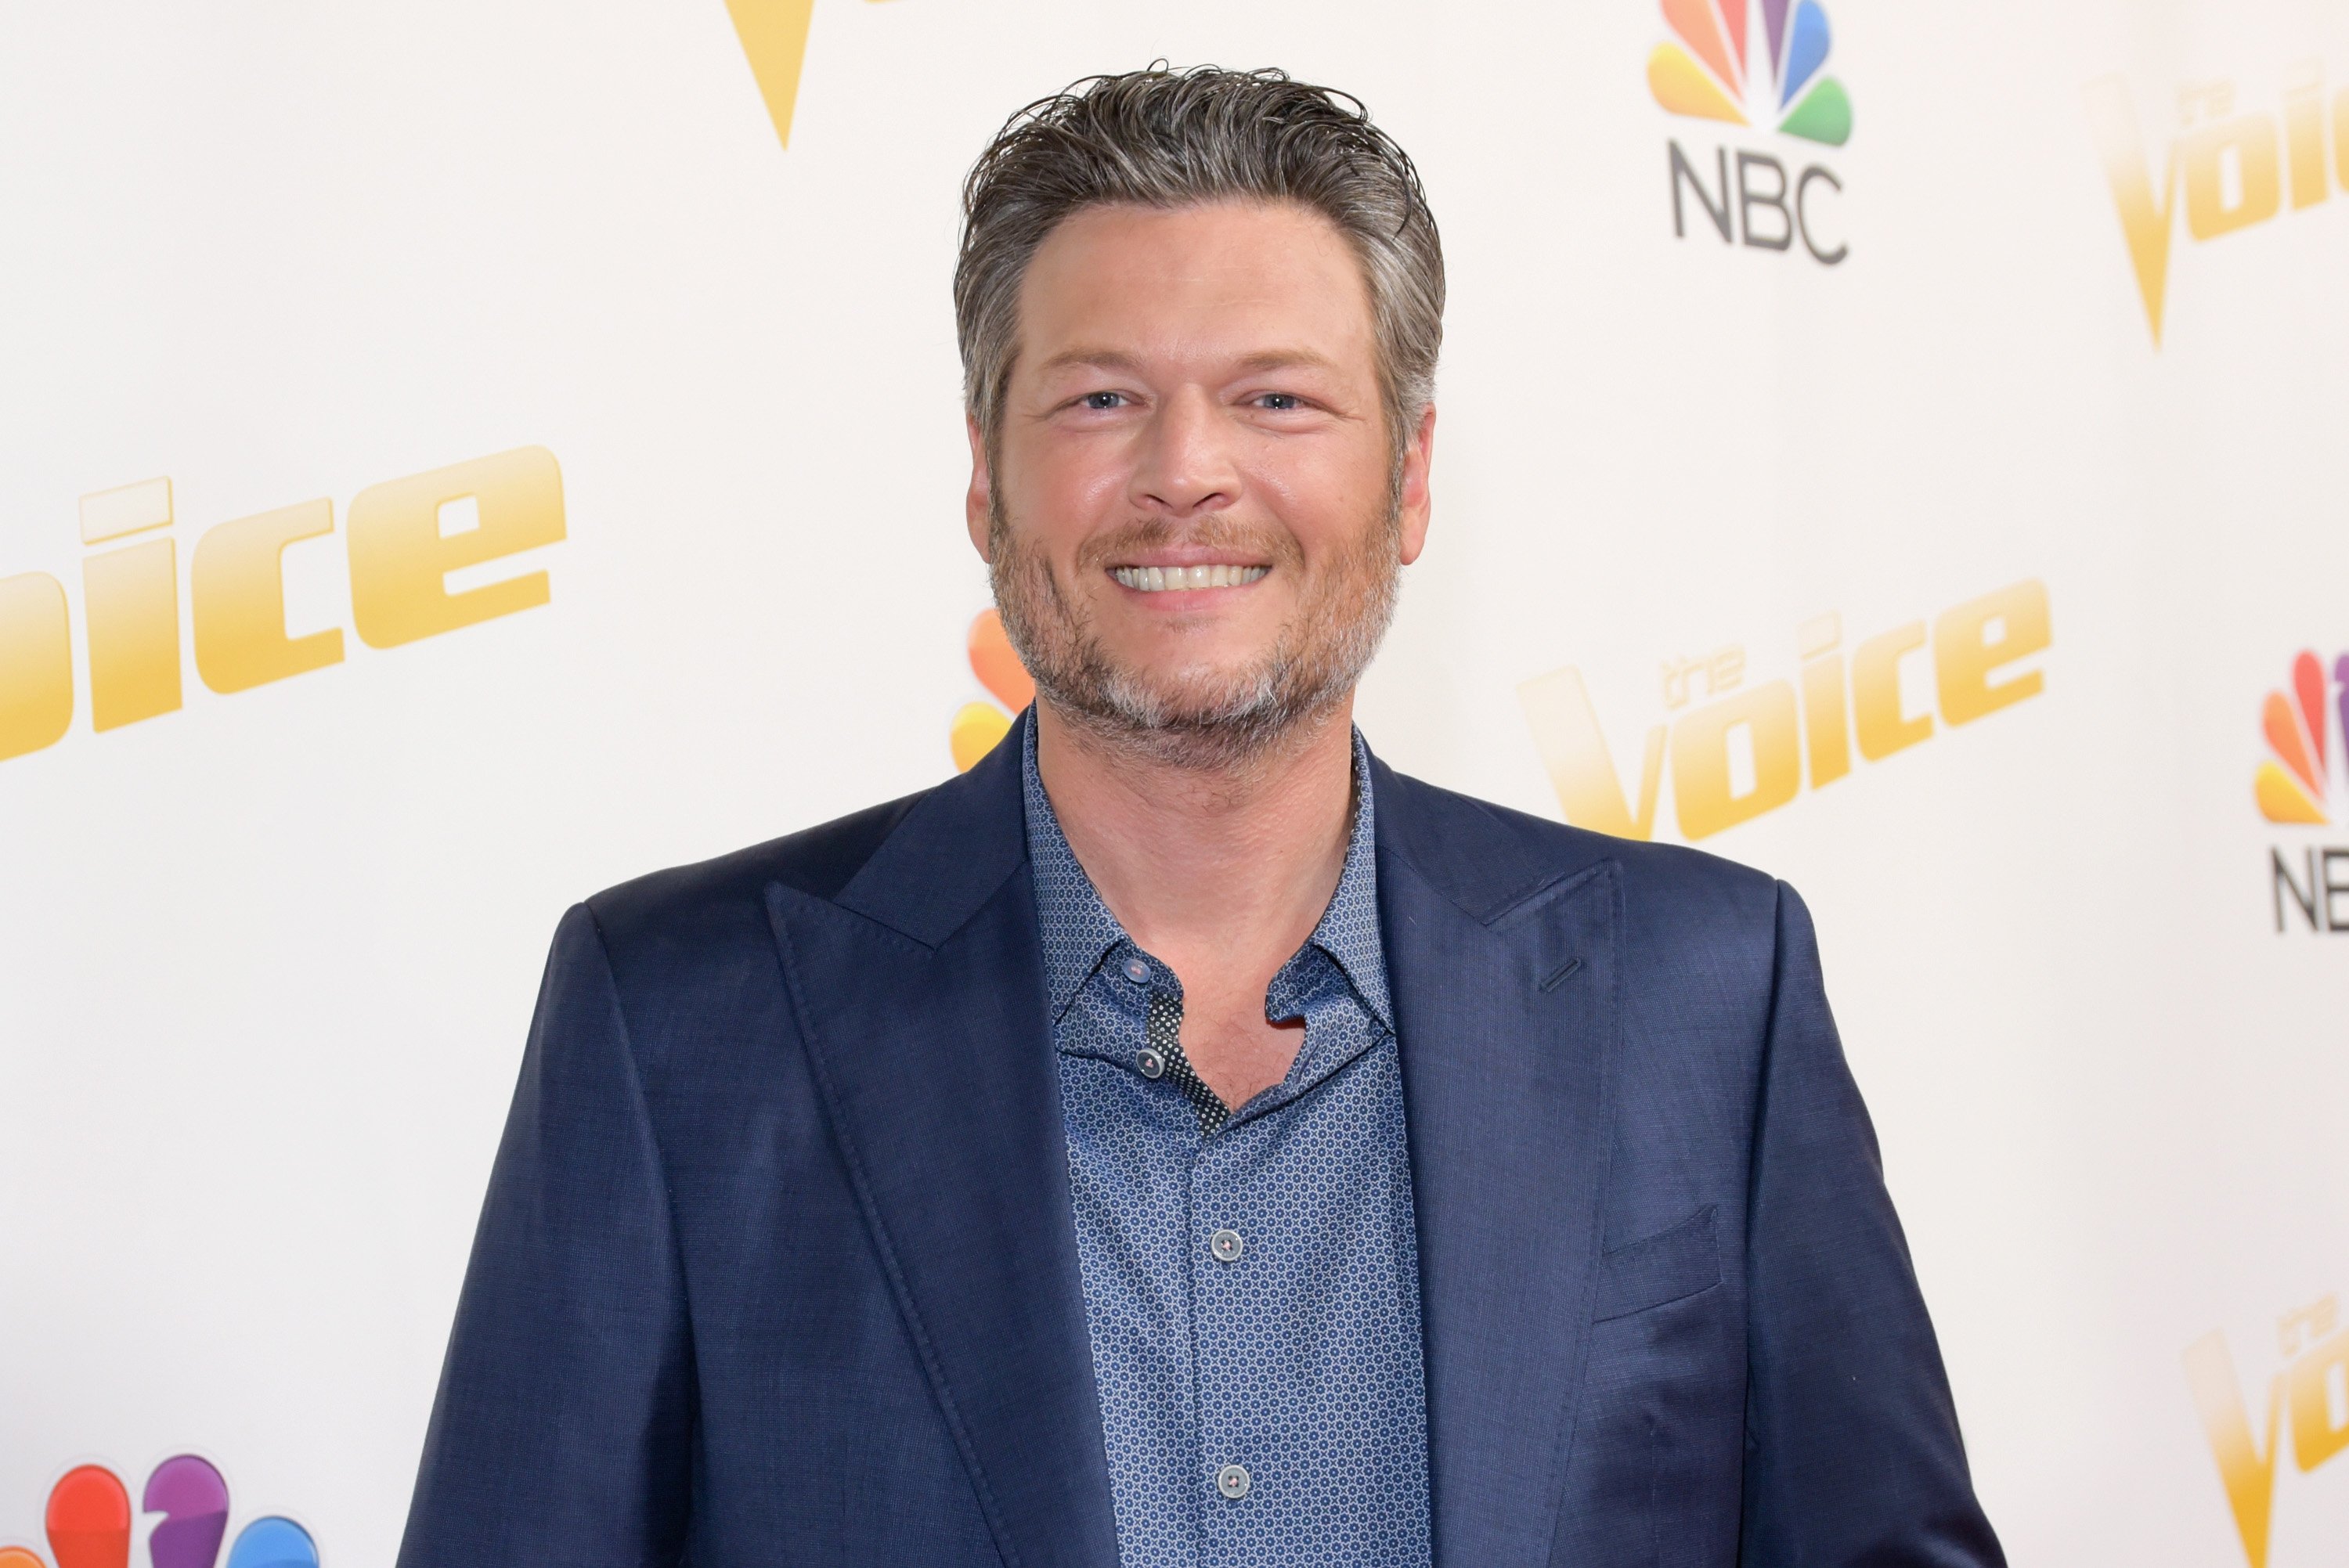 Blake Shelton attends NBC's 'The Voice' Season 14 taping on April 23, 2018, in Universal City, California. | Source: Getty Images.